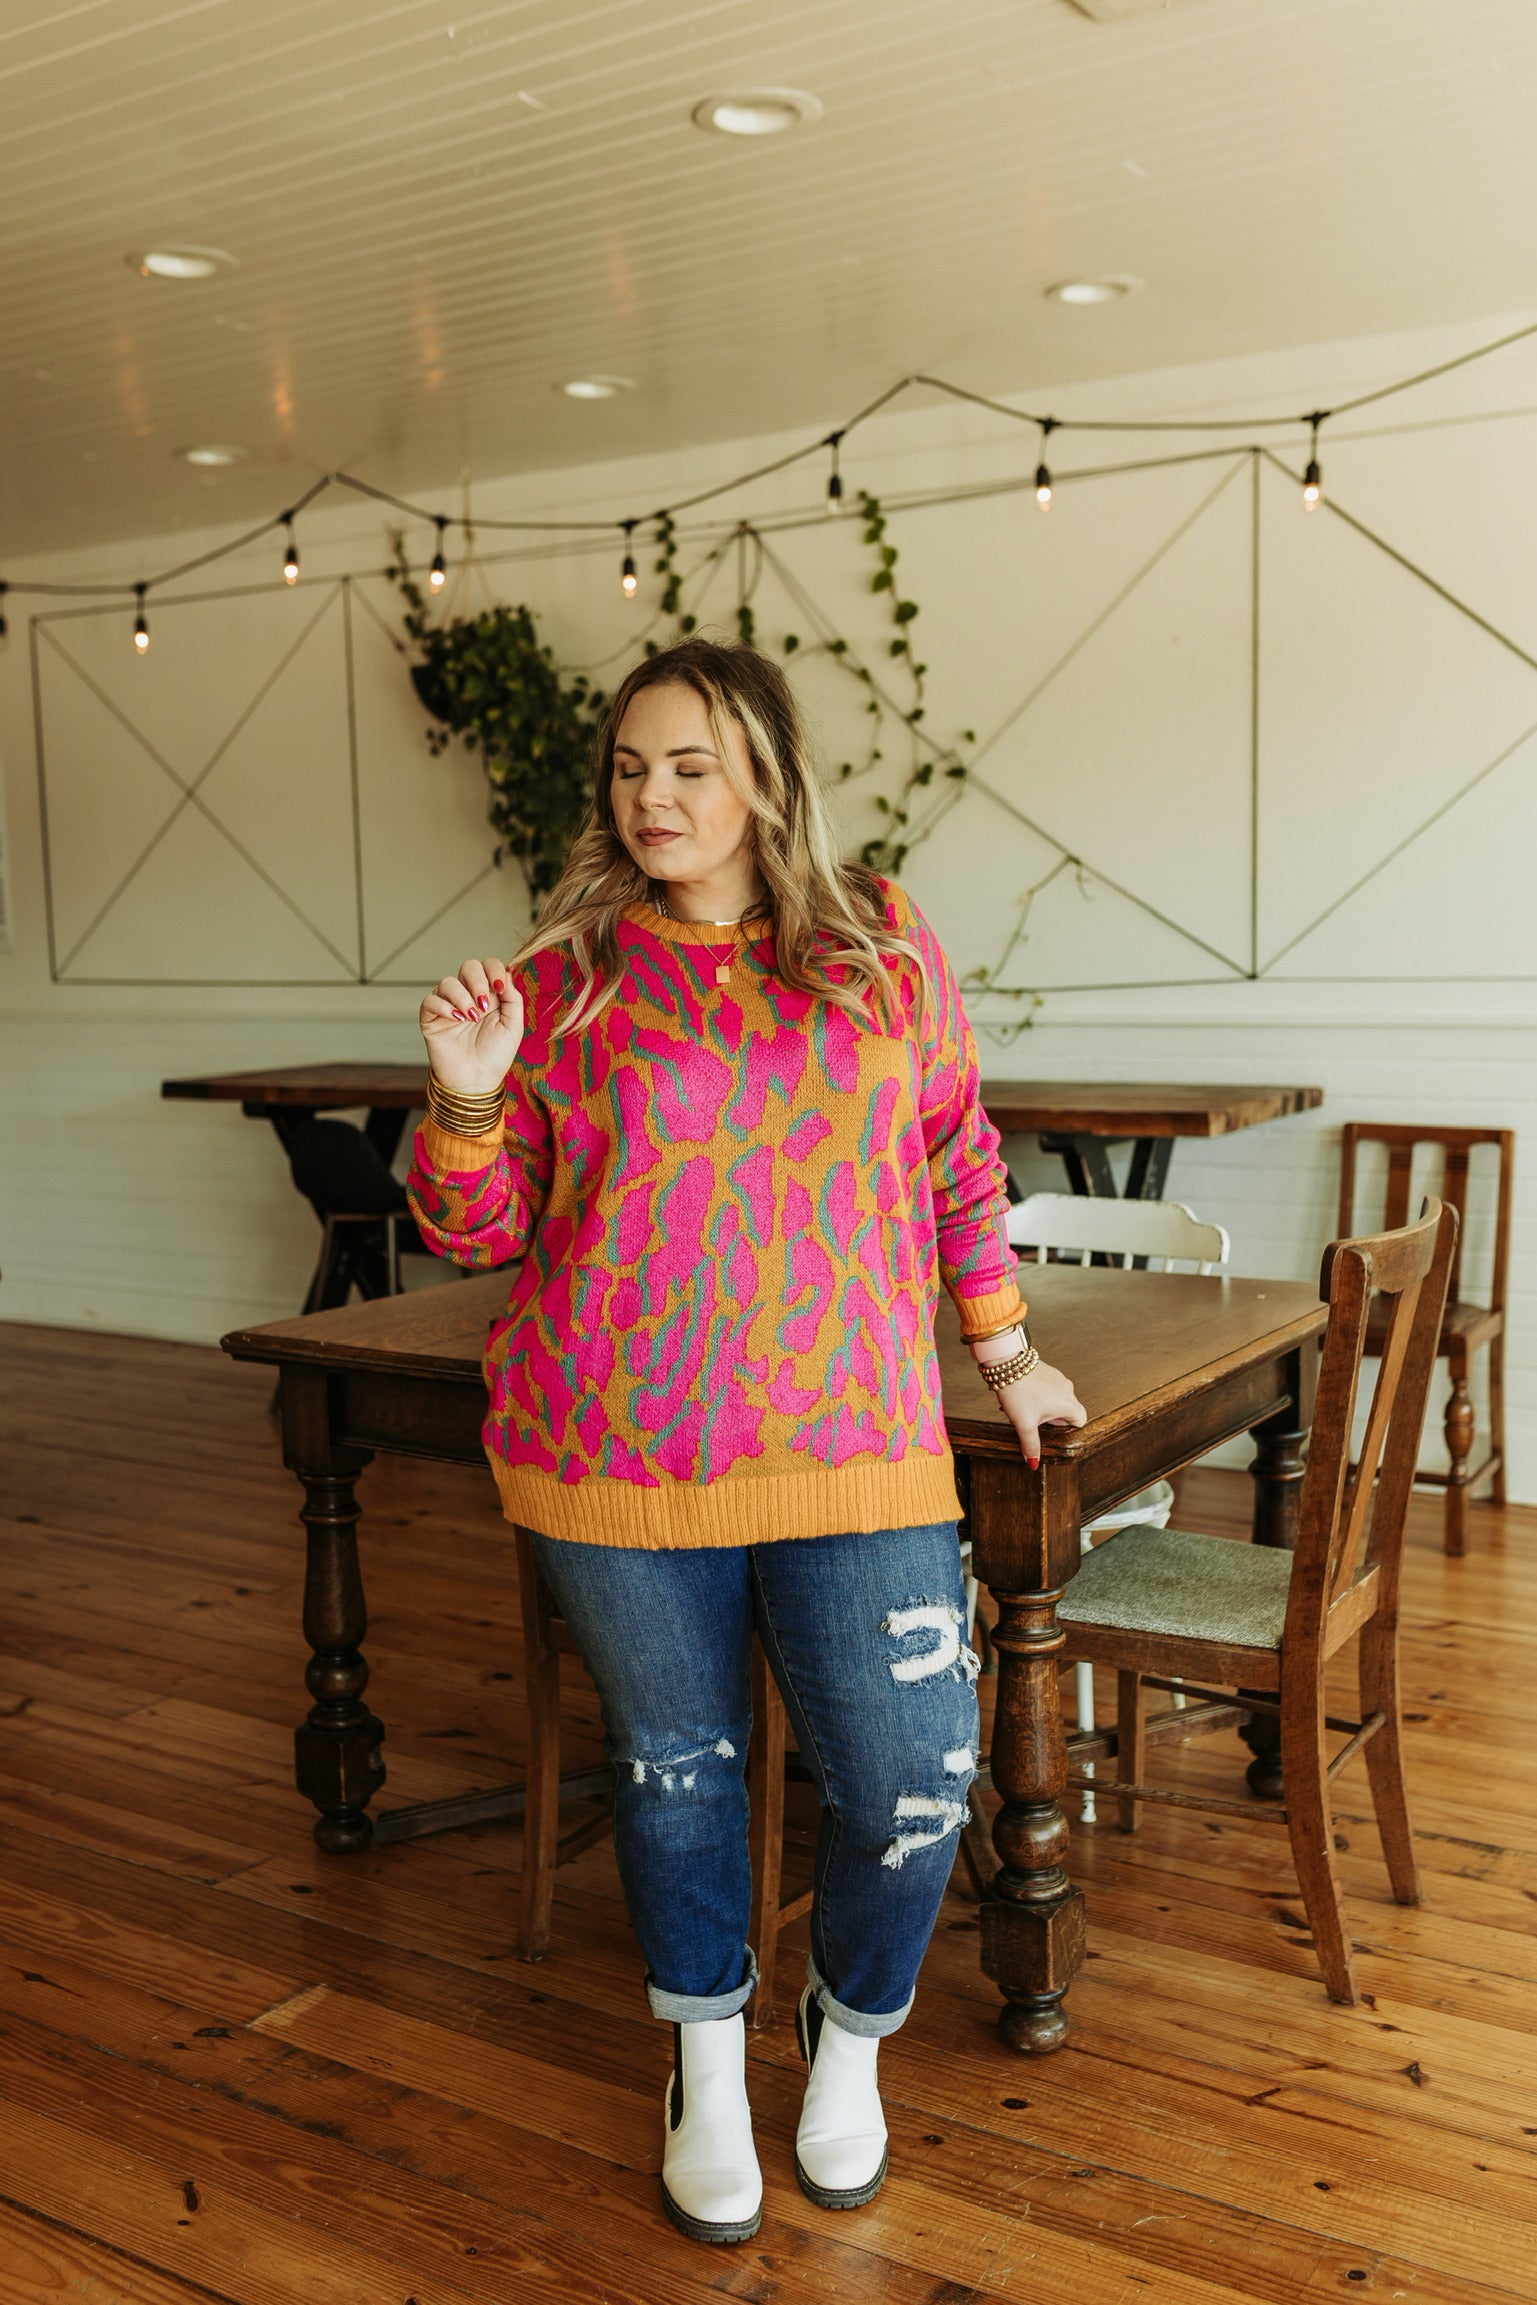 No Hesitation Animal Print Long Sleeve Sweater in Yellow and Neon Pink - Giddy Up Glamour Boutique